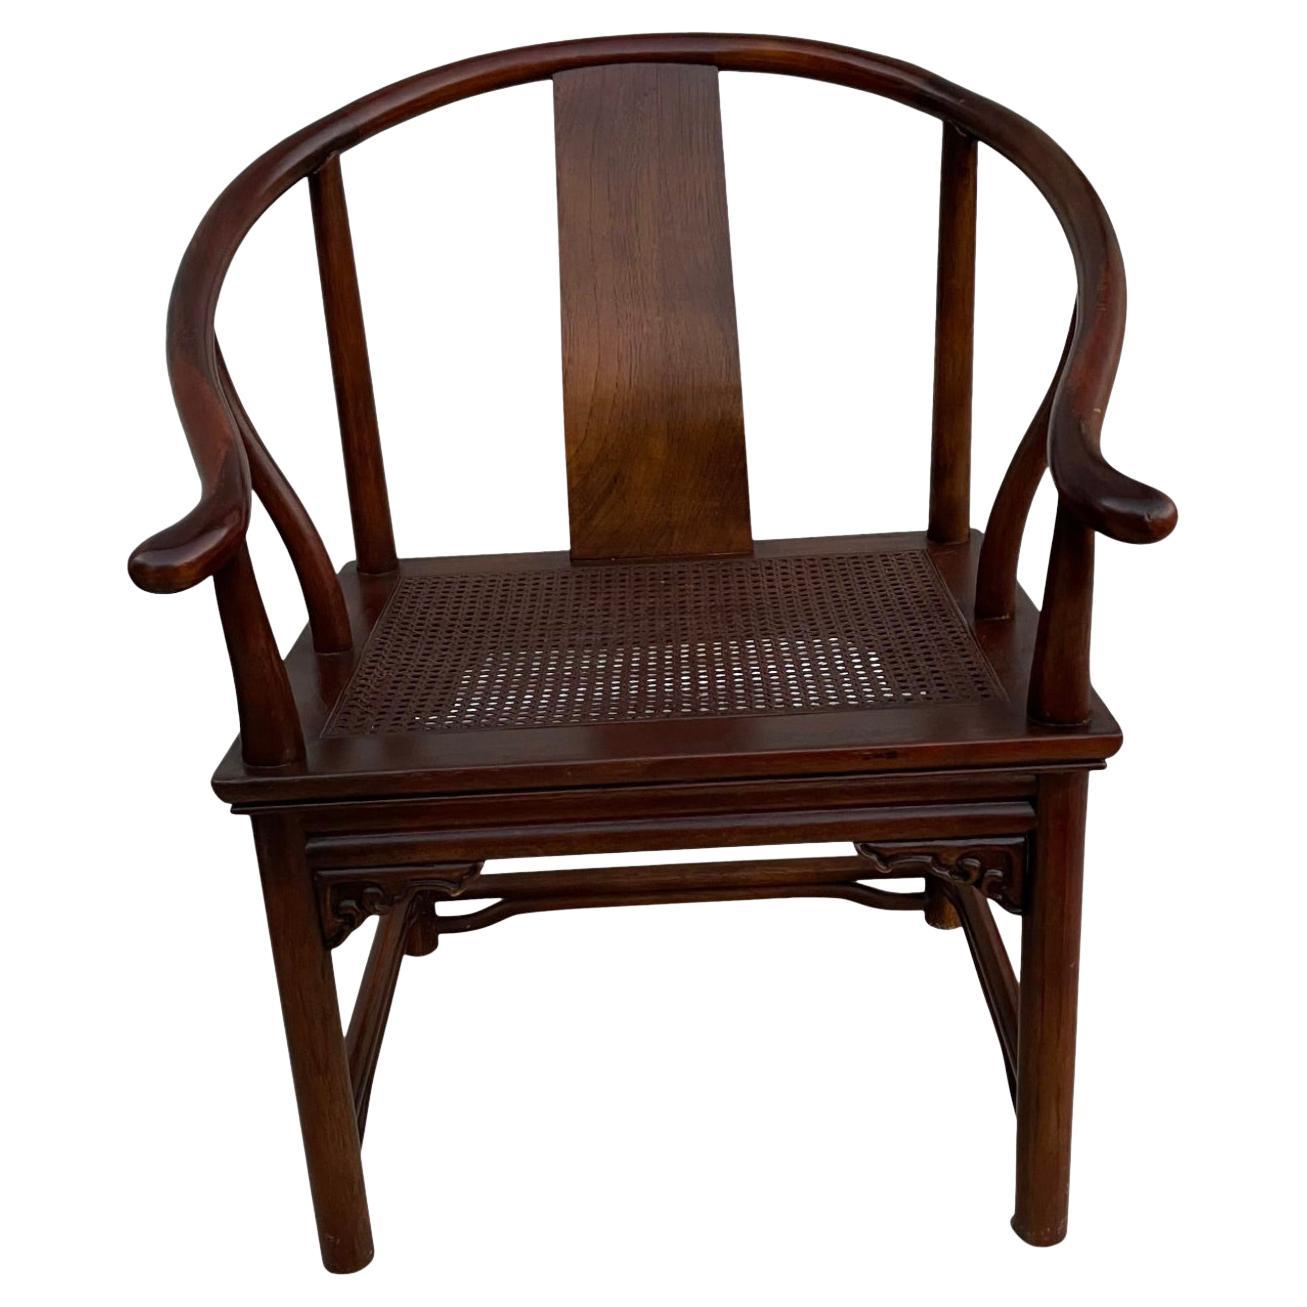 Henredon Heritage Horseshoe Chinoiserie Chair with Caning